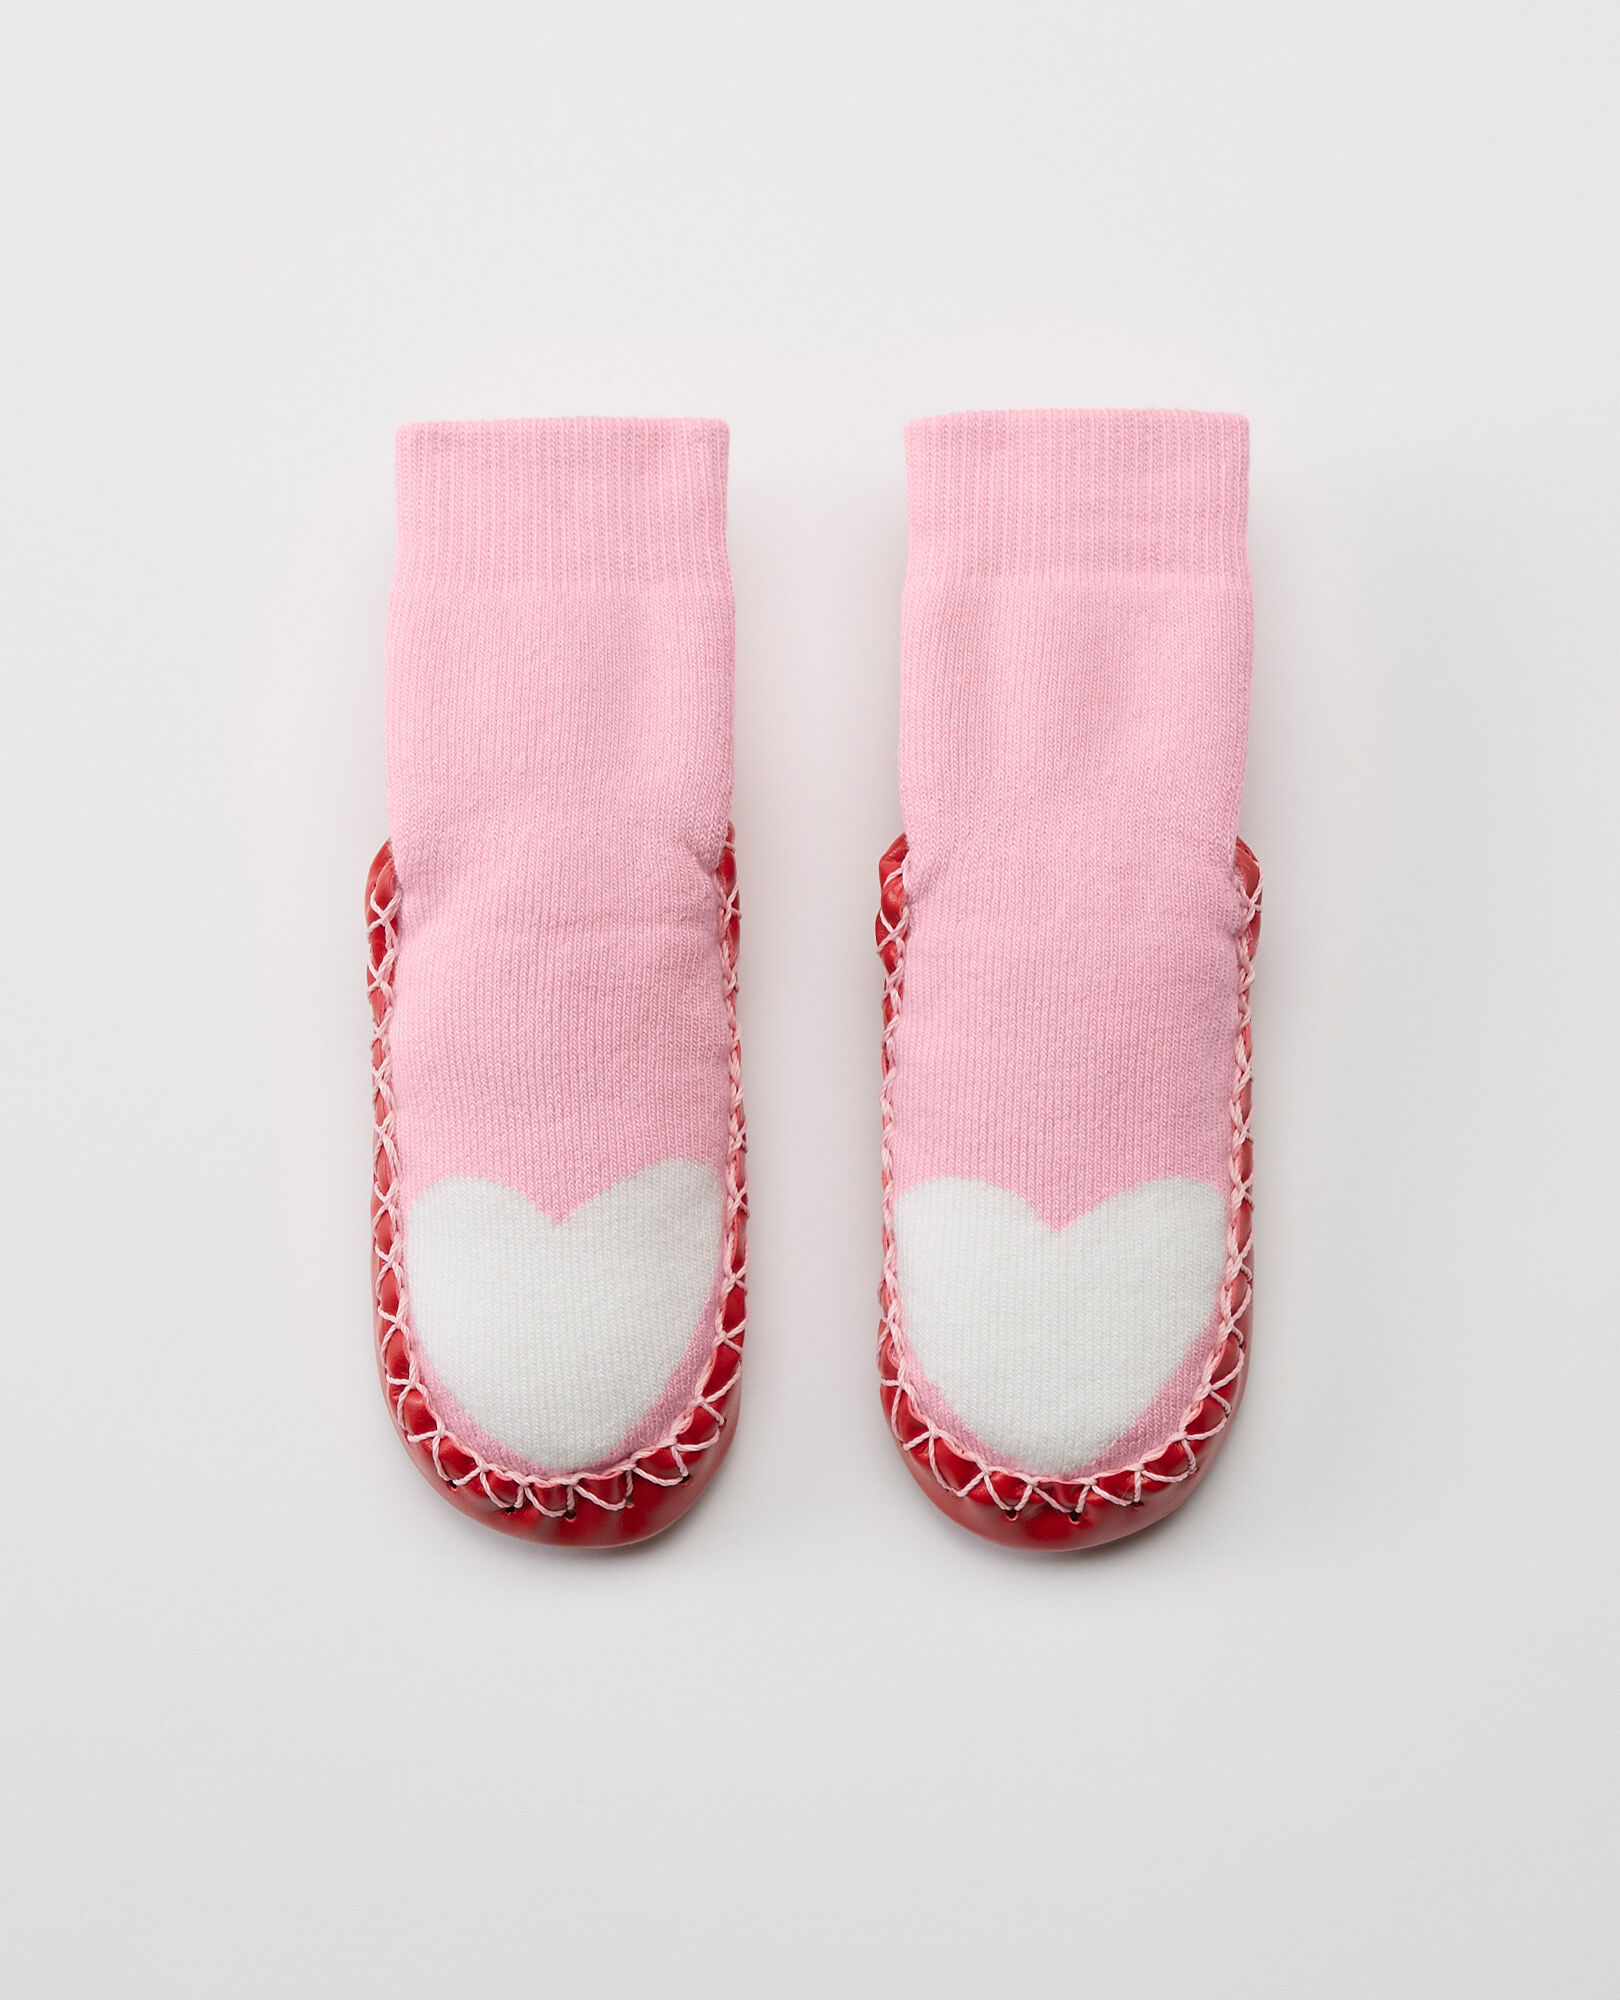 hanna andersson slipper moccasins